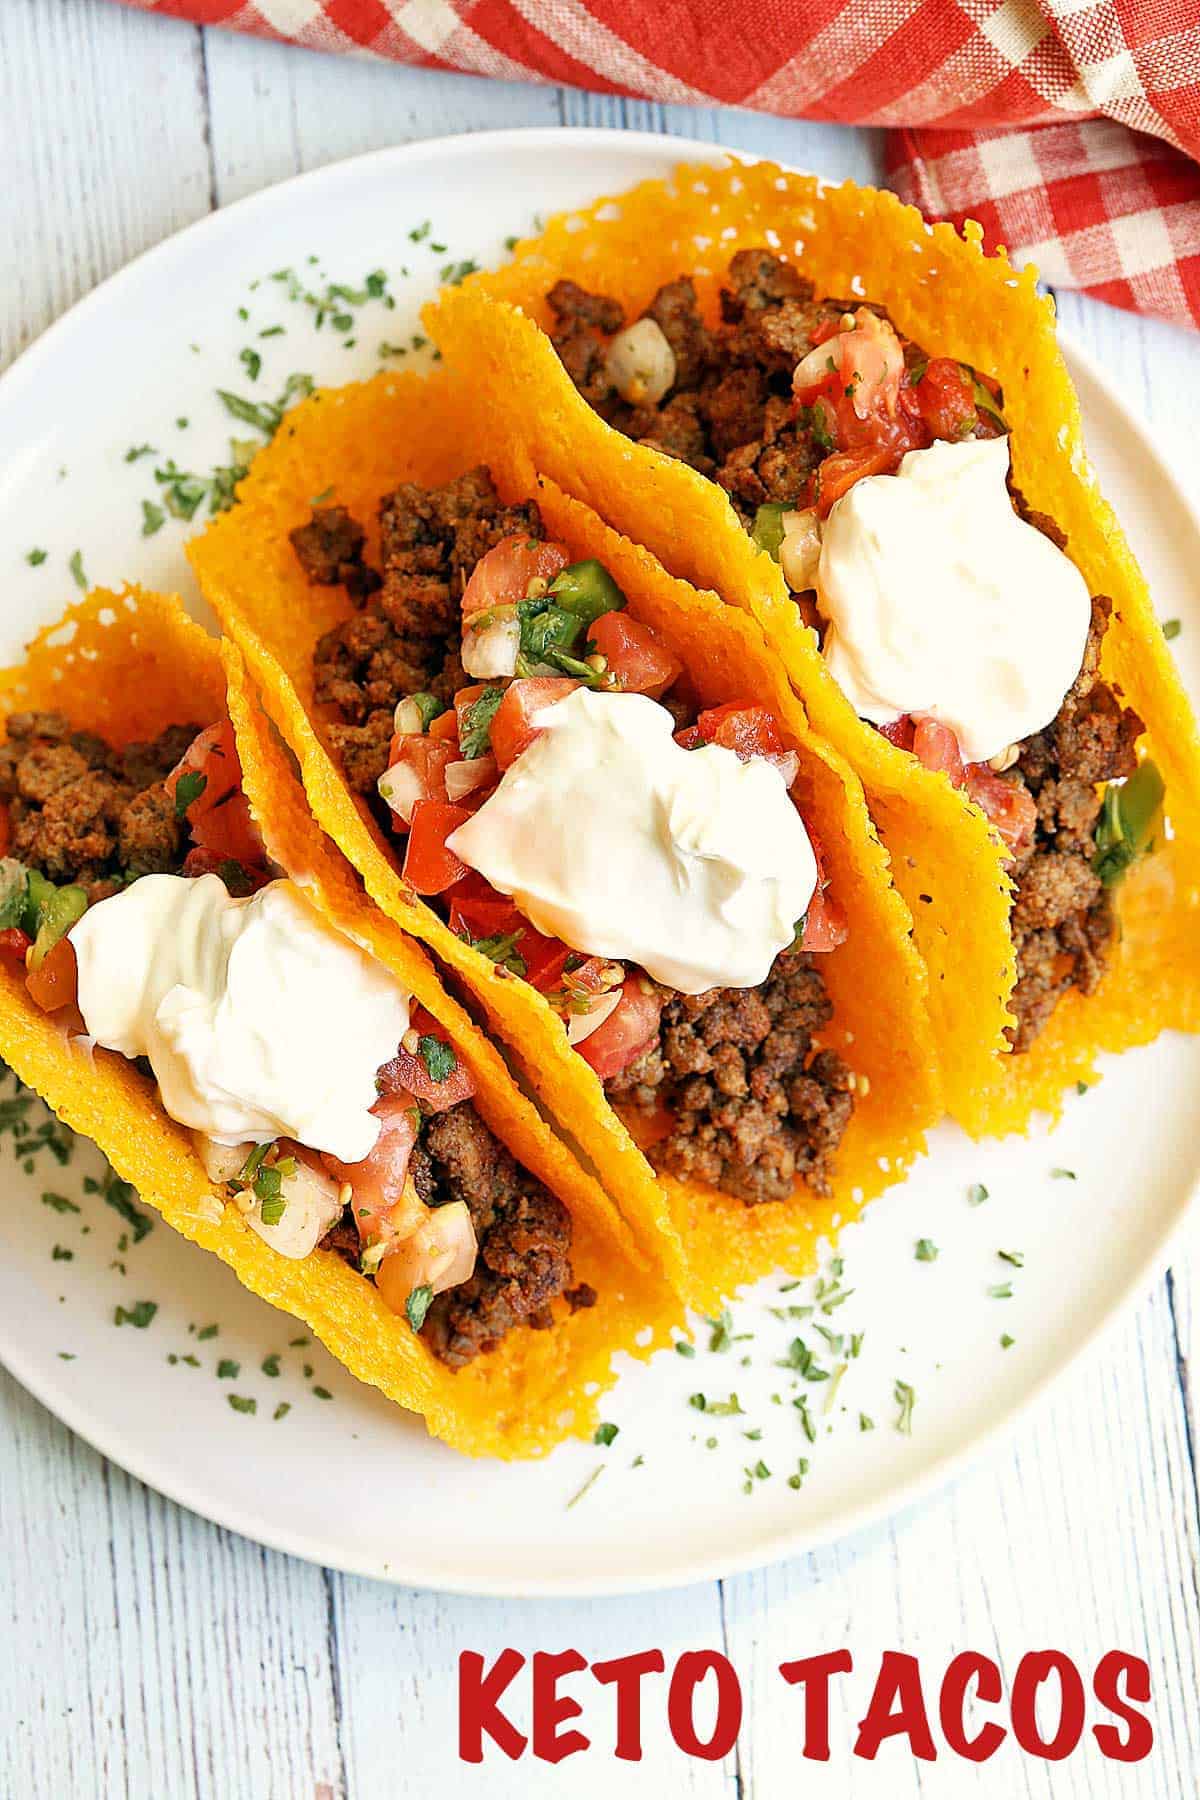 Low-carb tacos served on a white plate with a red napkin. 